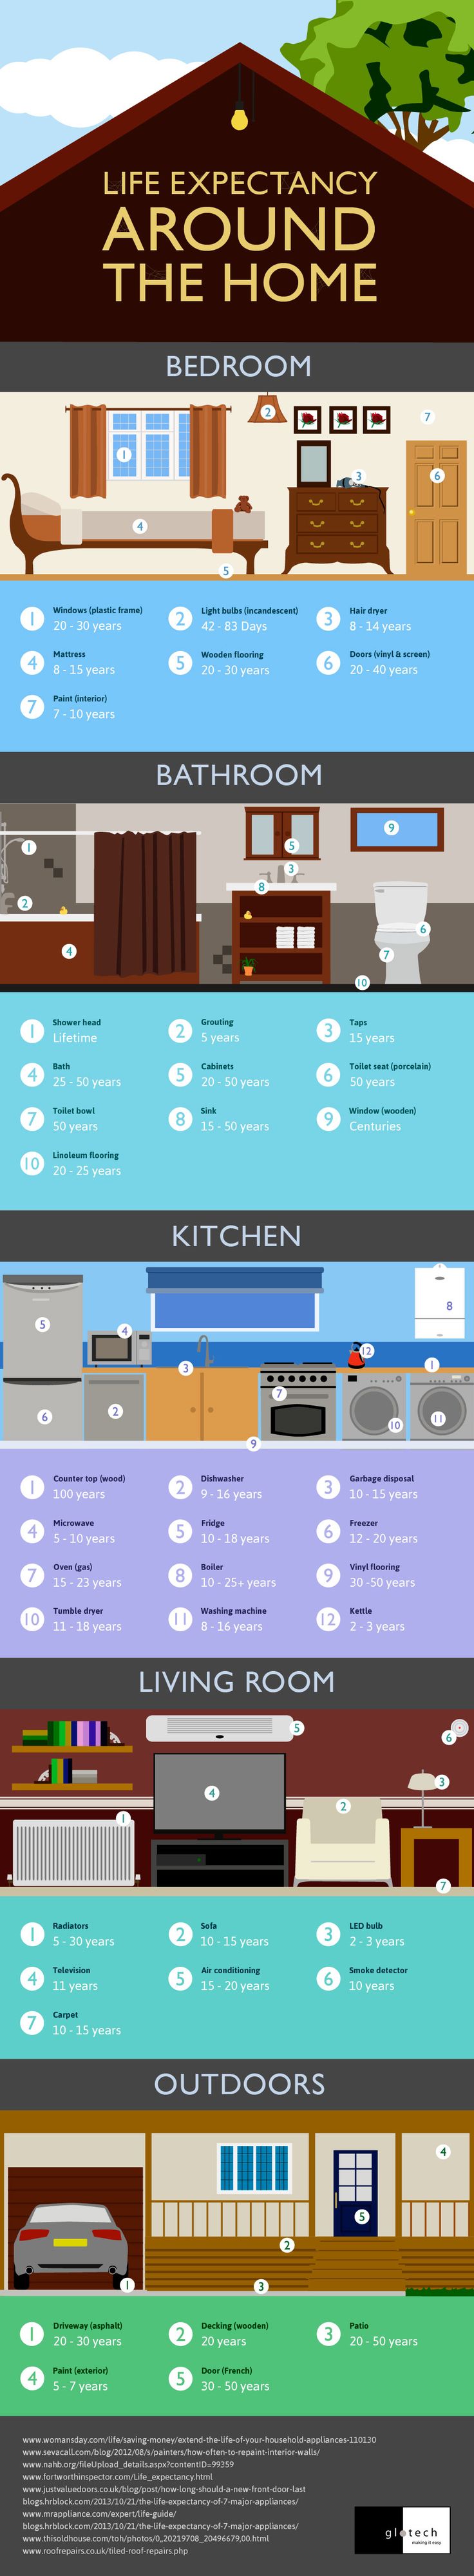 The life expectancy of certain items in your home might surprise you